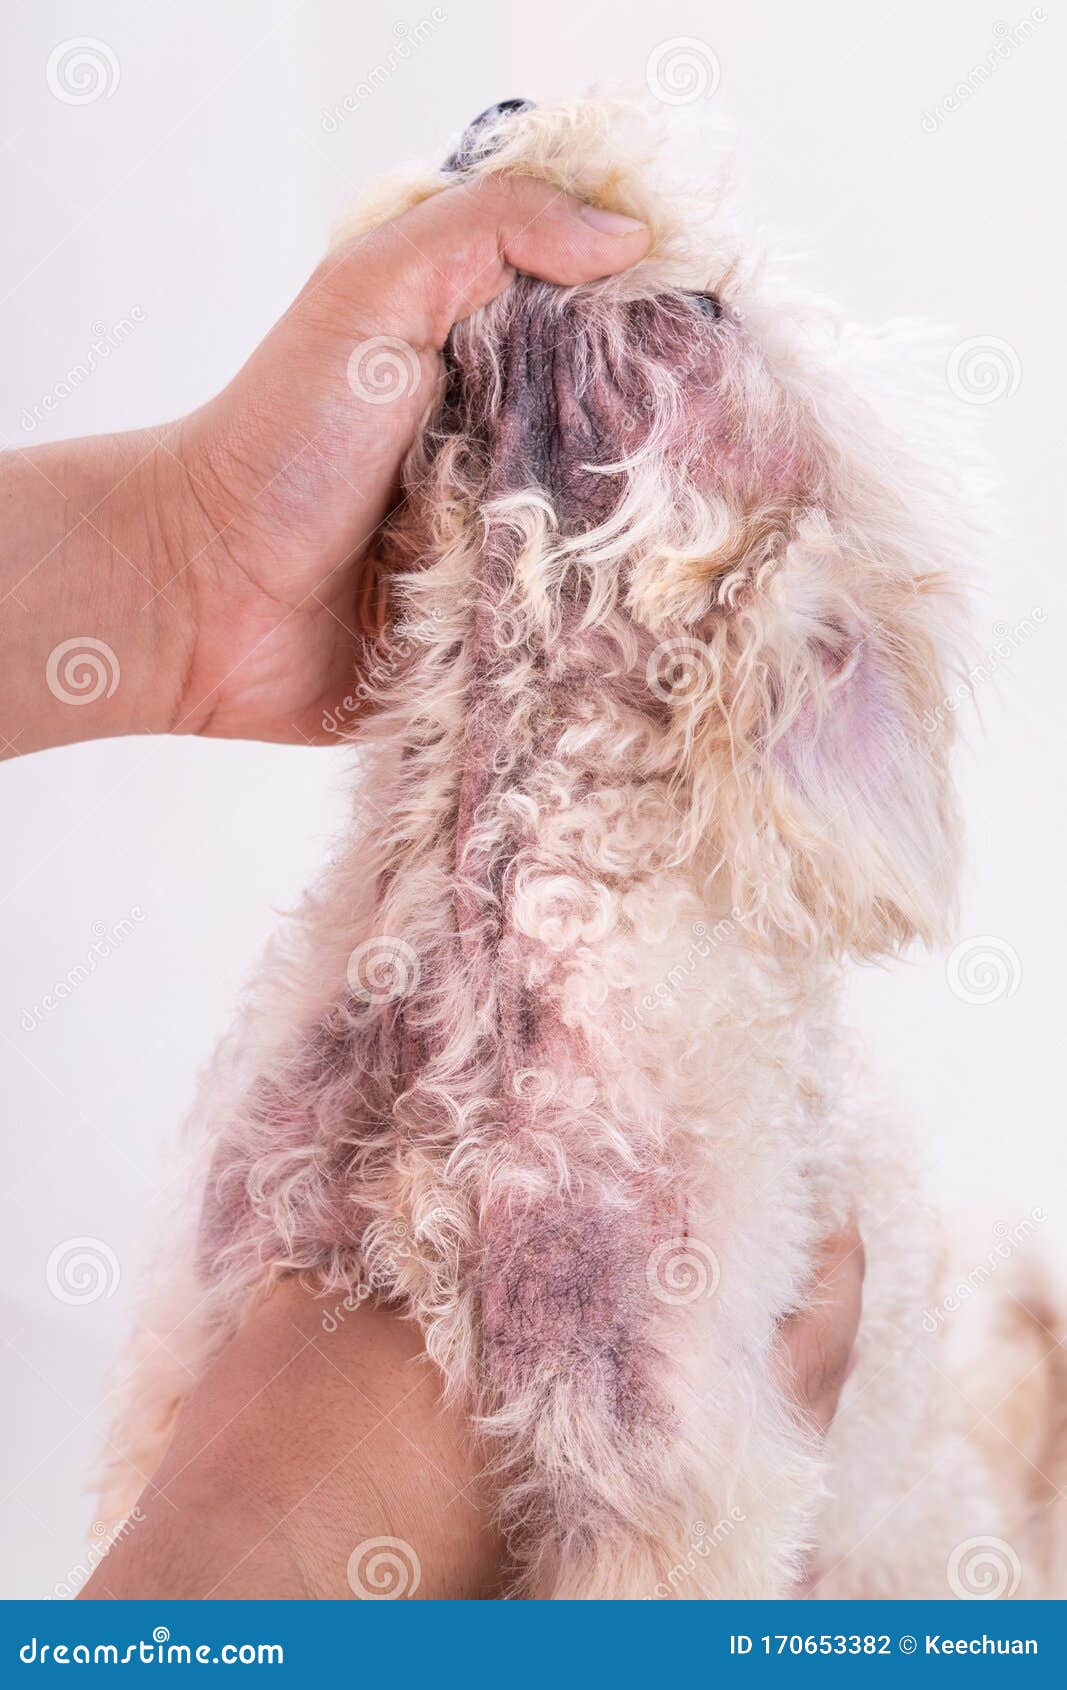 Veterinarian Inspecting Dog With Skin Irritation With Yeast Fungal